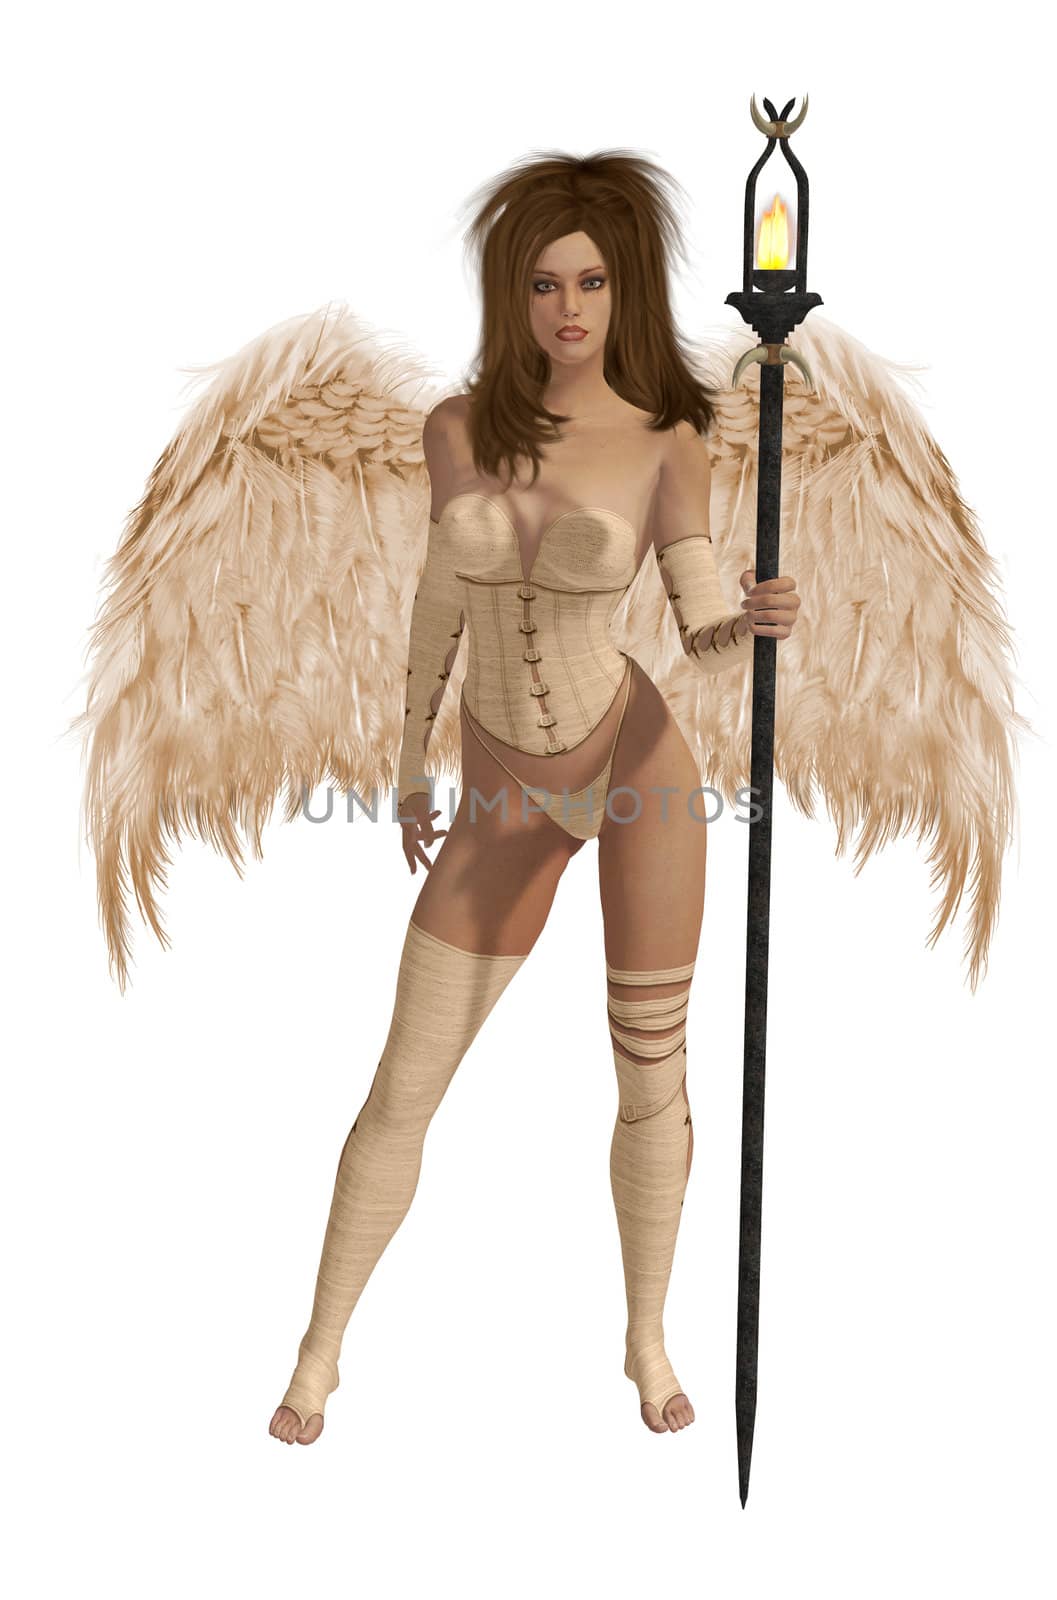 Beige winged angel with brunette hair standing holding a torch